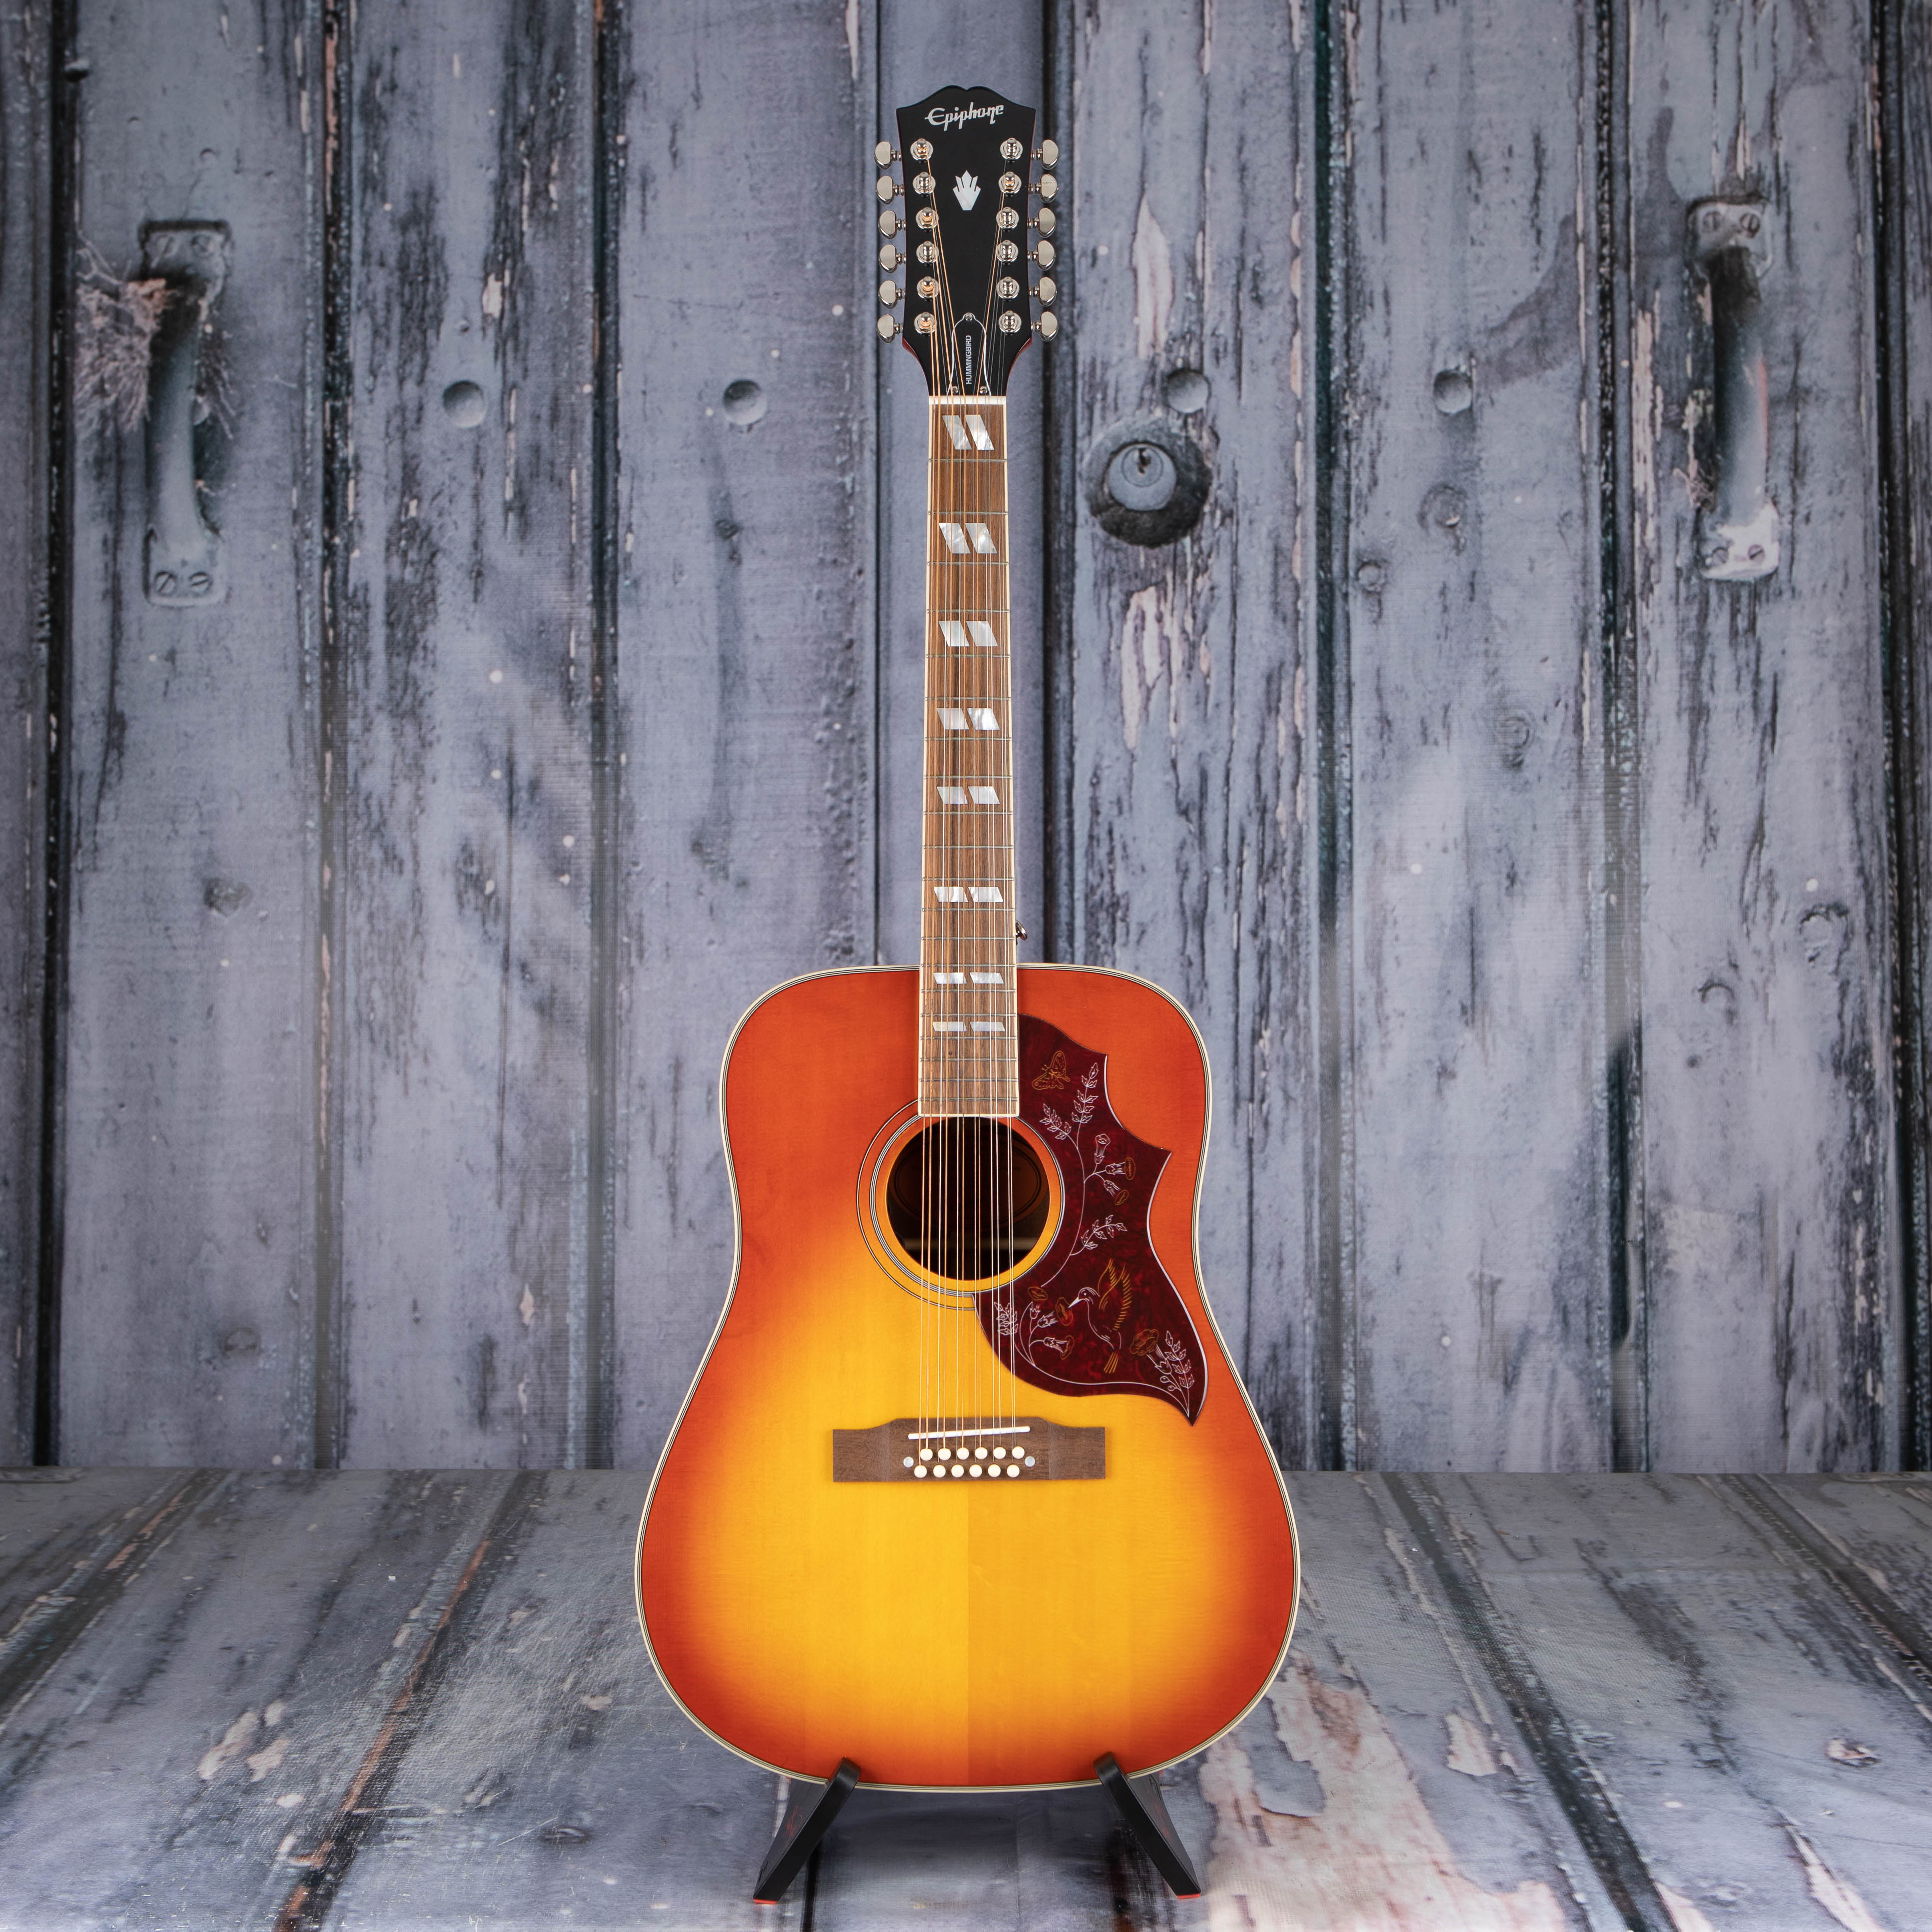 Epiphone Hummingbird 12-String Acoustic/Electric Guitar, Aged Cherry Sunburst Gloss, front